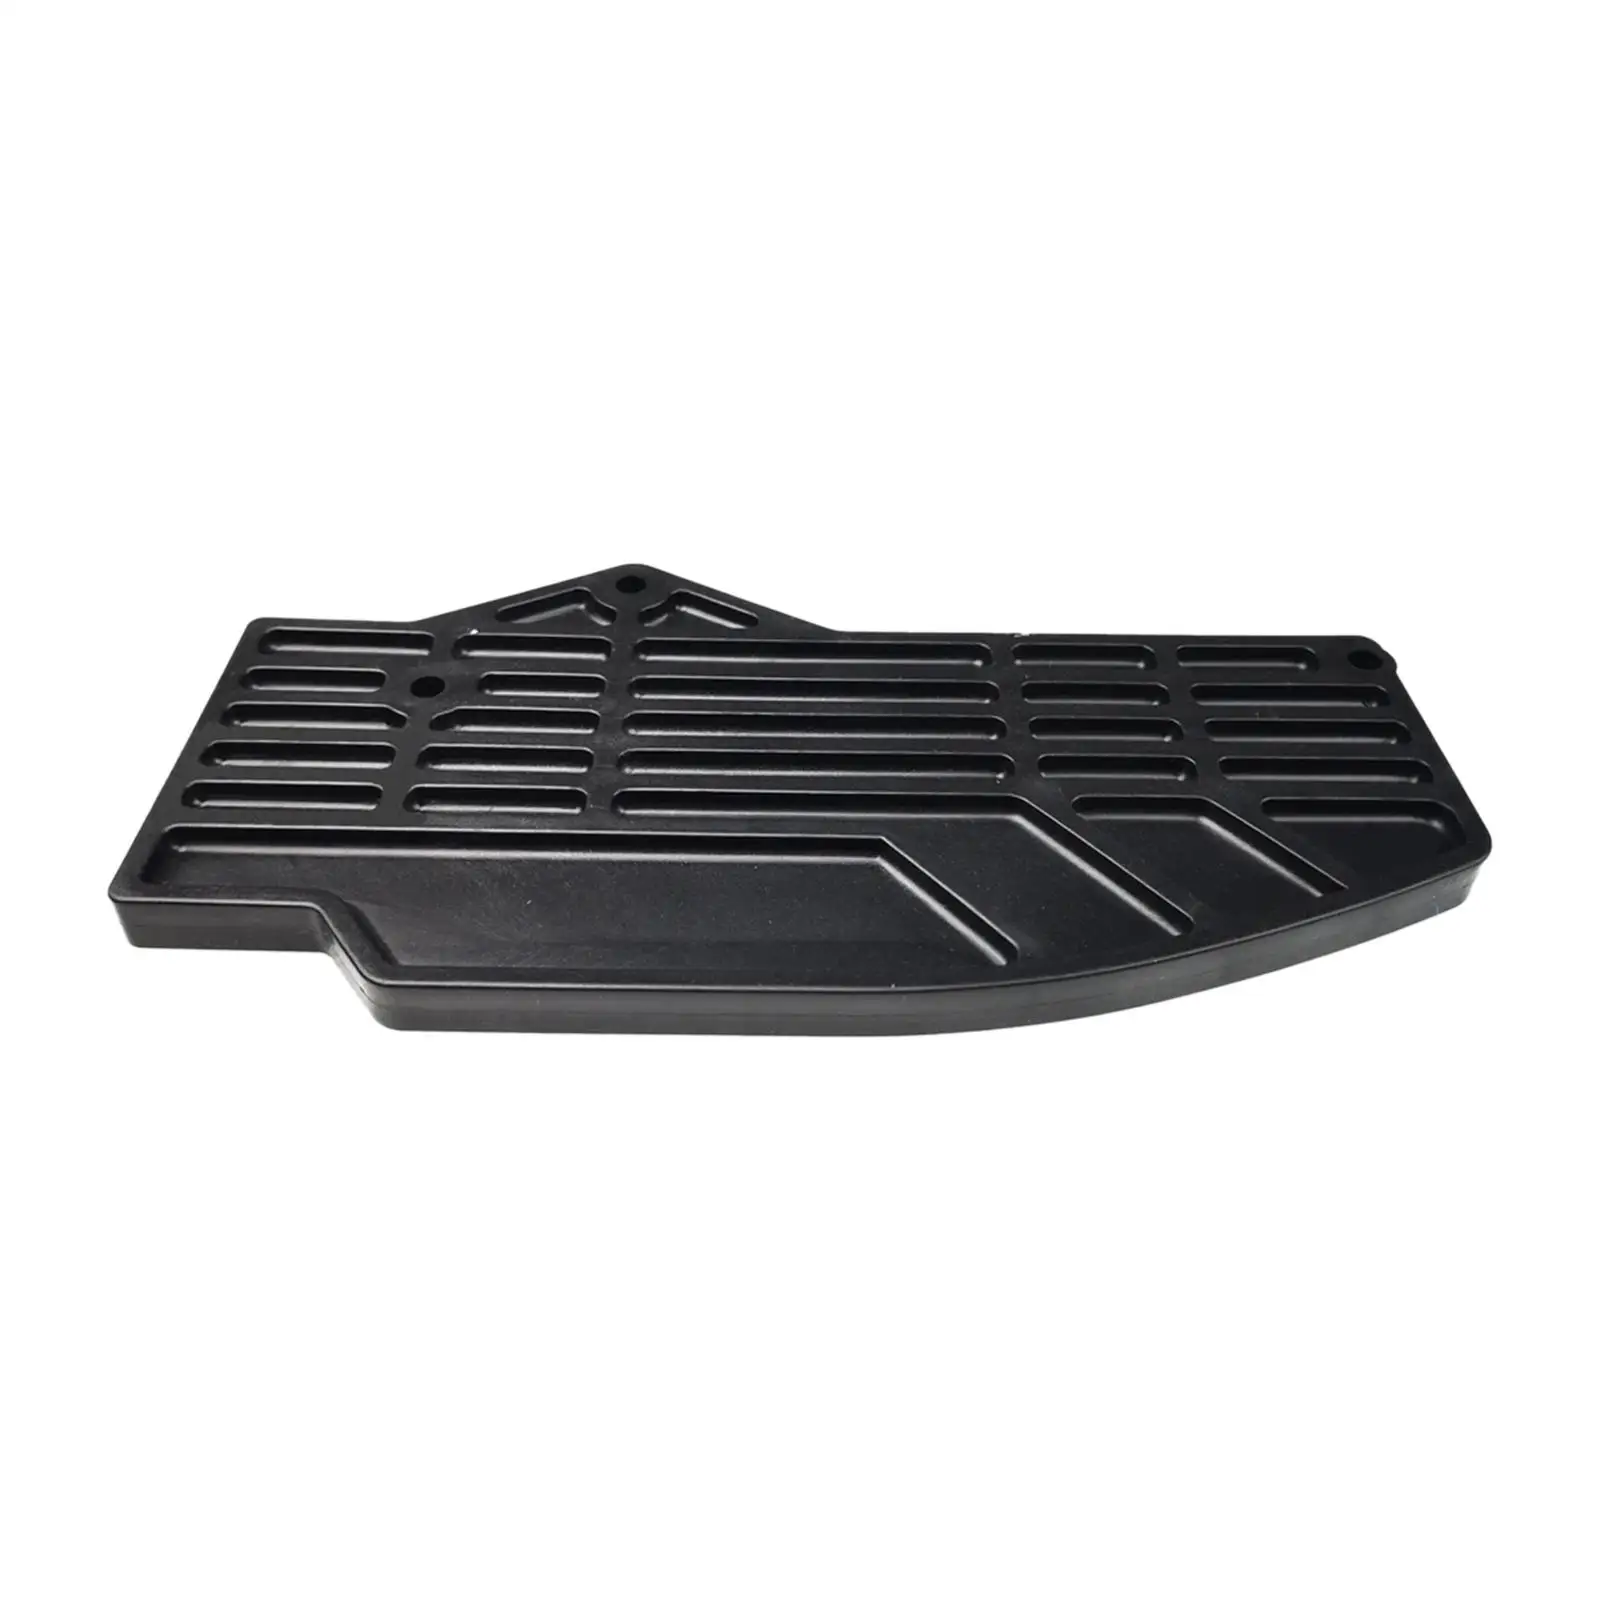 Remote Control Box Spacer Plate 703-48293-10 703-48293 Black Nylon Plate Directly Replace for Yamaha Outboard 703 Accessory